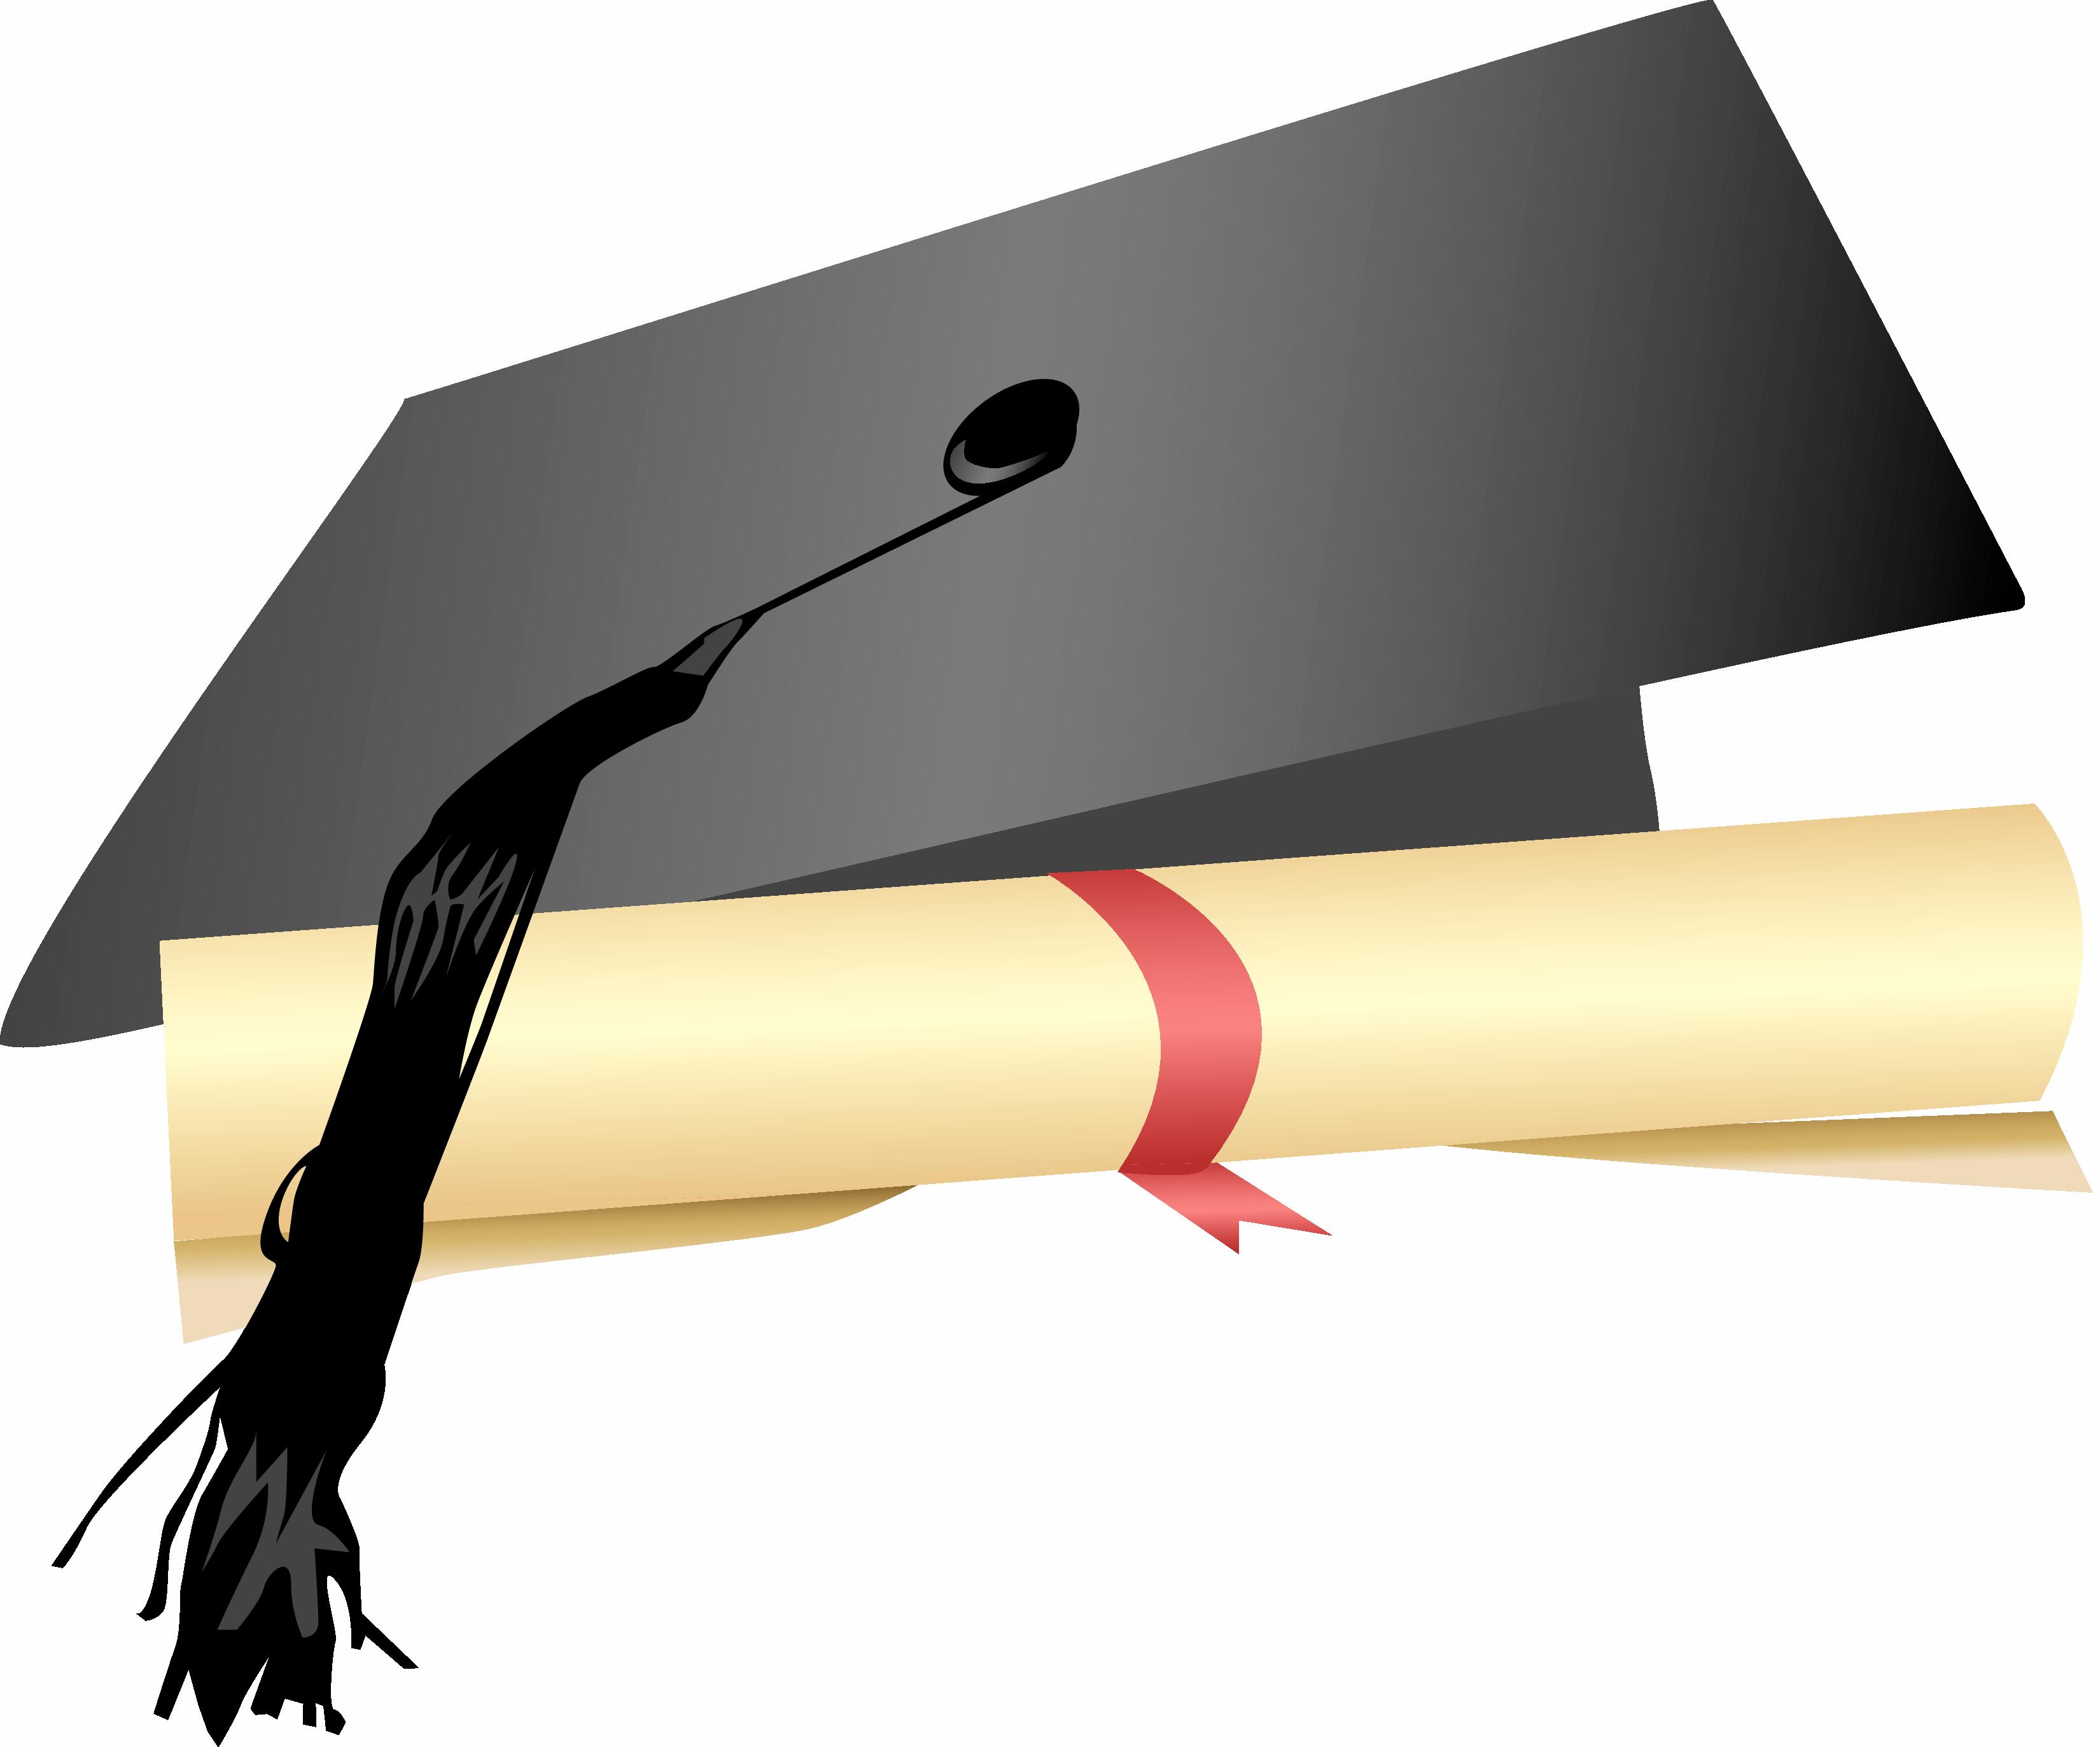 Gold Graduation Cap Png #34912 - Free Icons and PNG Backgrounds